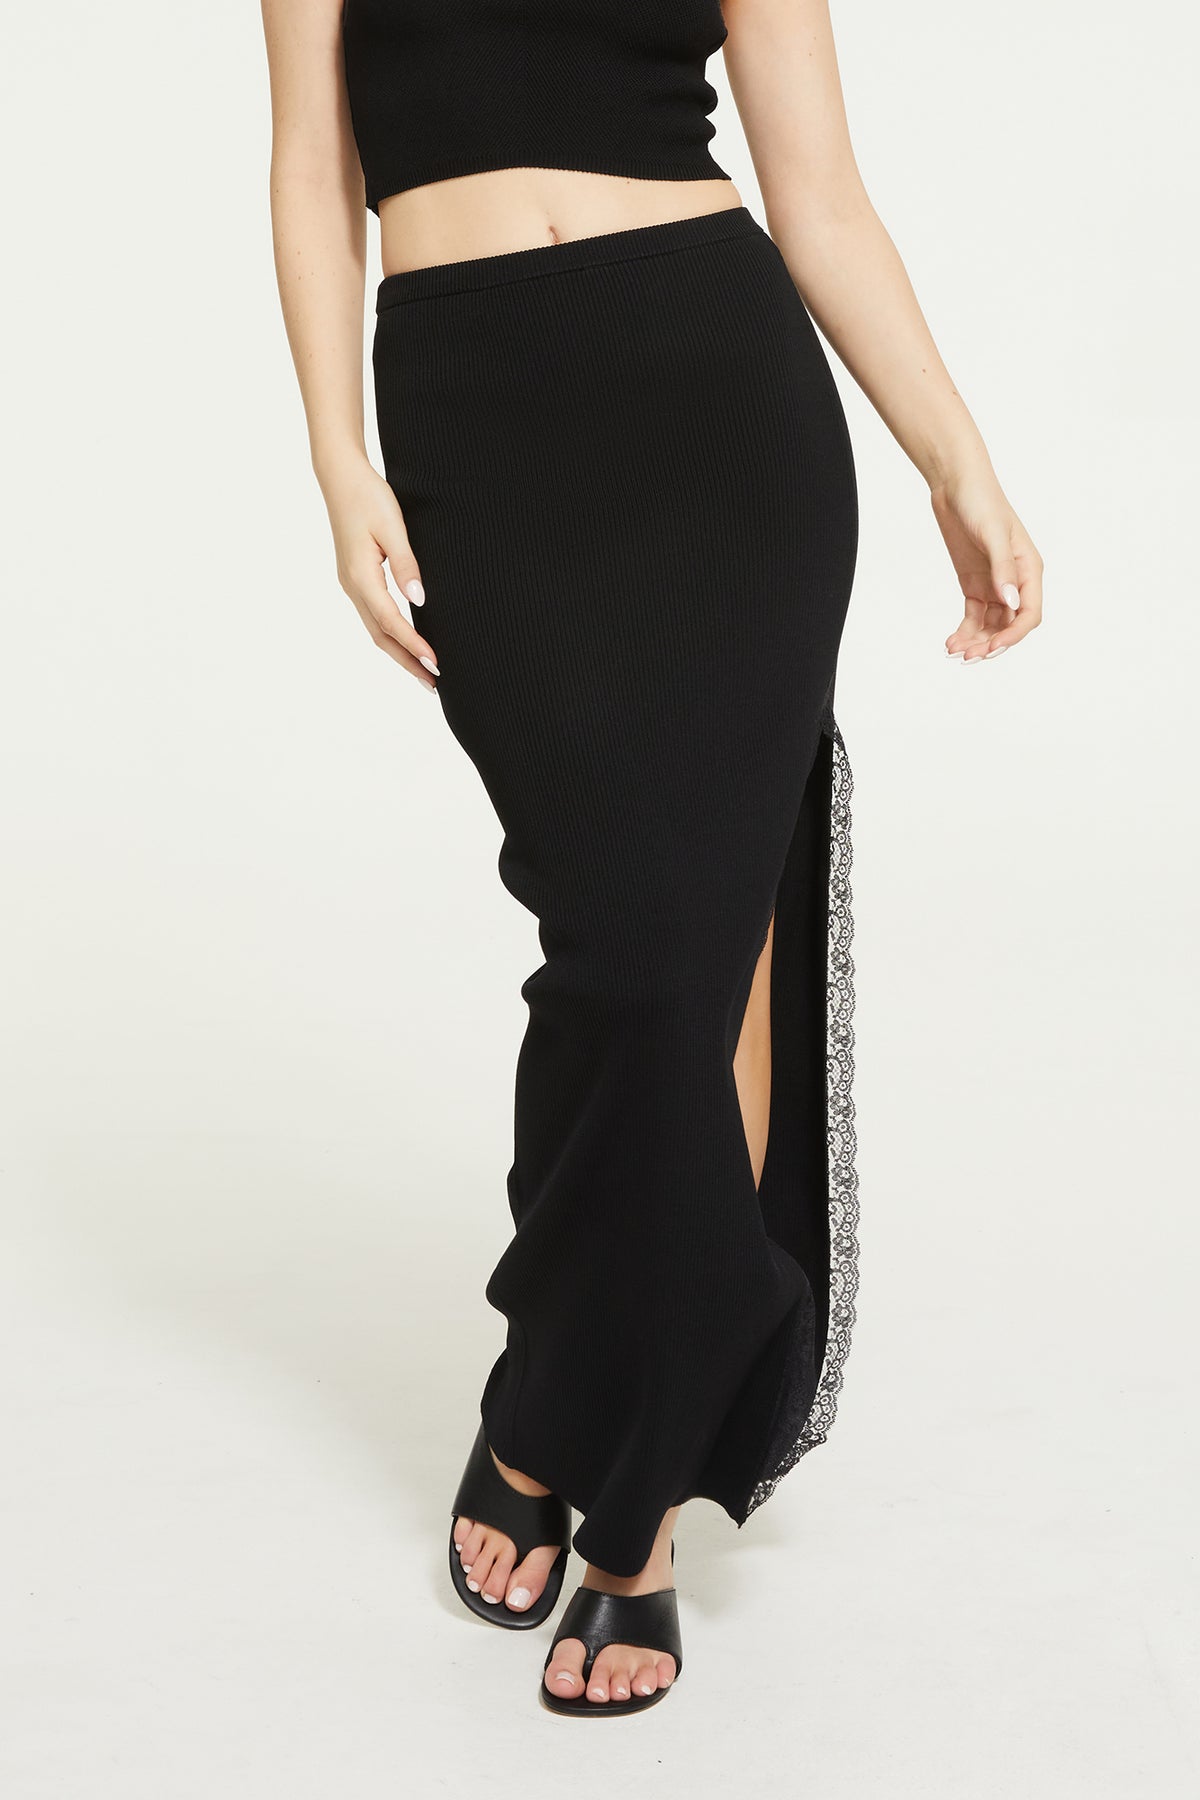 The Fern Knit Skirt By GINIA In Black